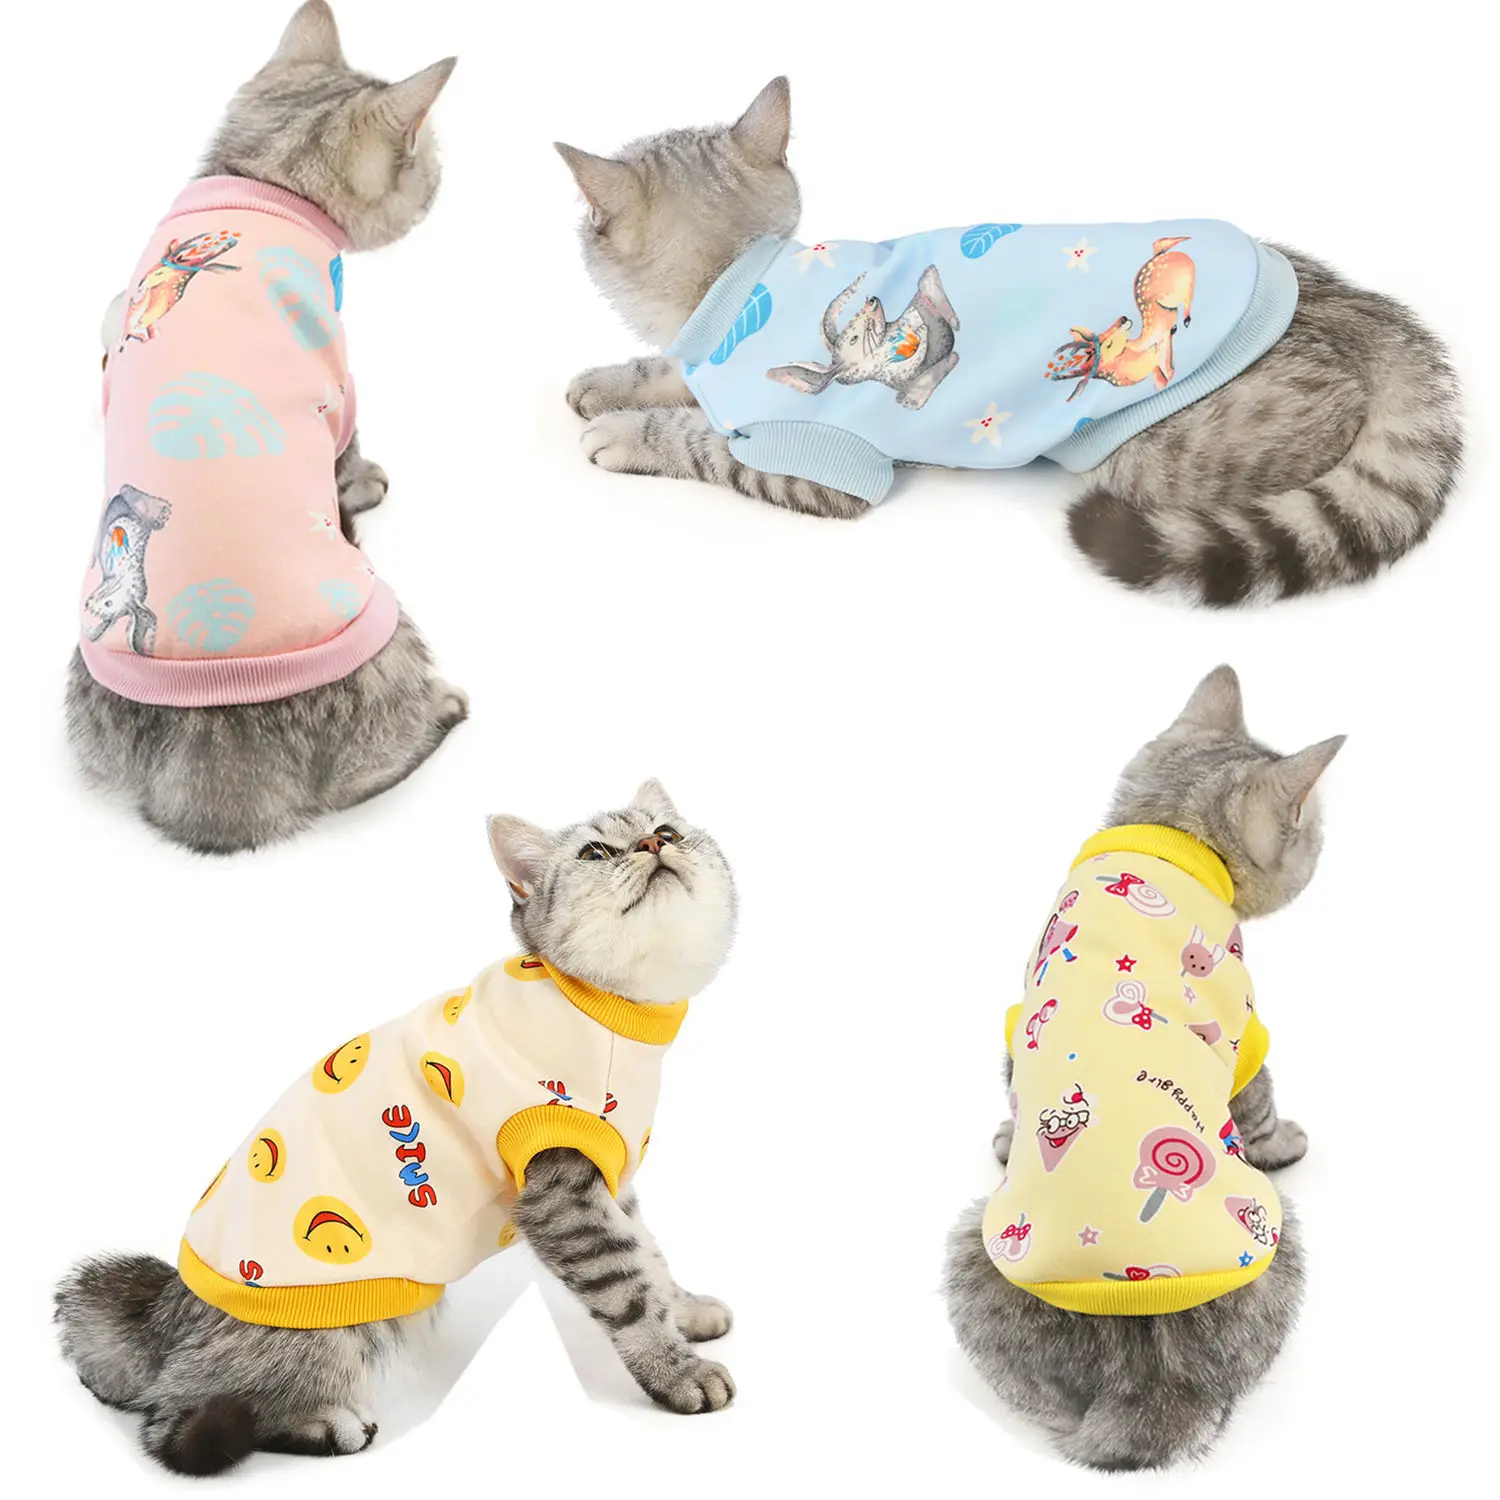 

HY Mascotas Wholesale Fashion Designers Soft Comfortable Cat Clothes New fashions sell like hot cakes, As photo